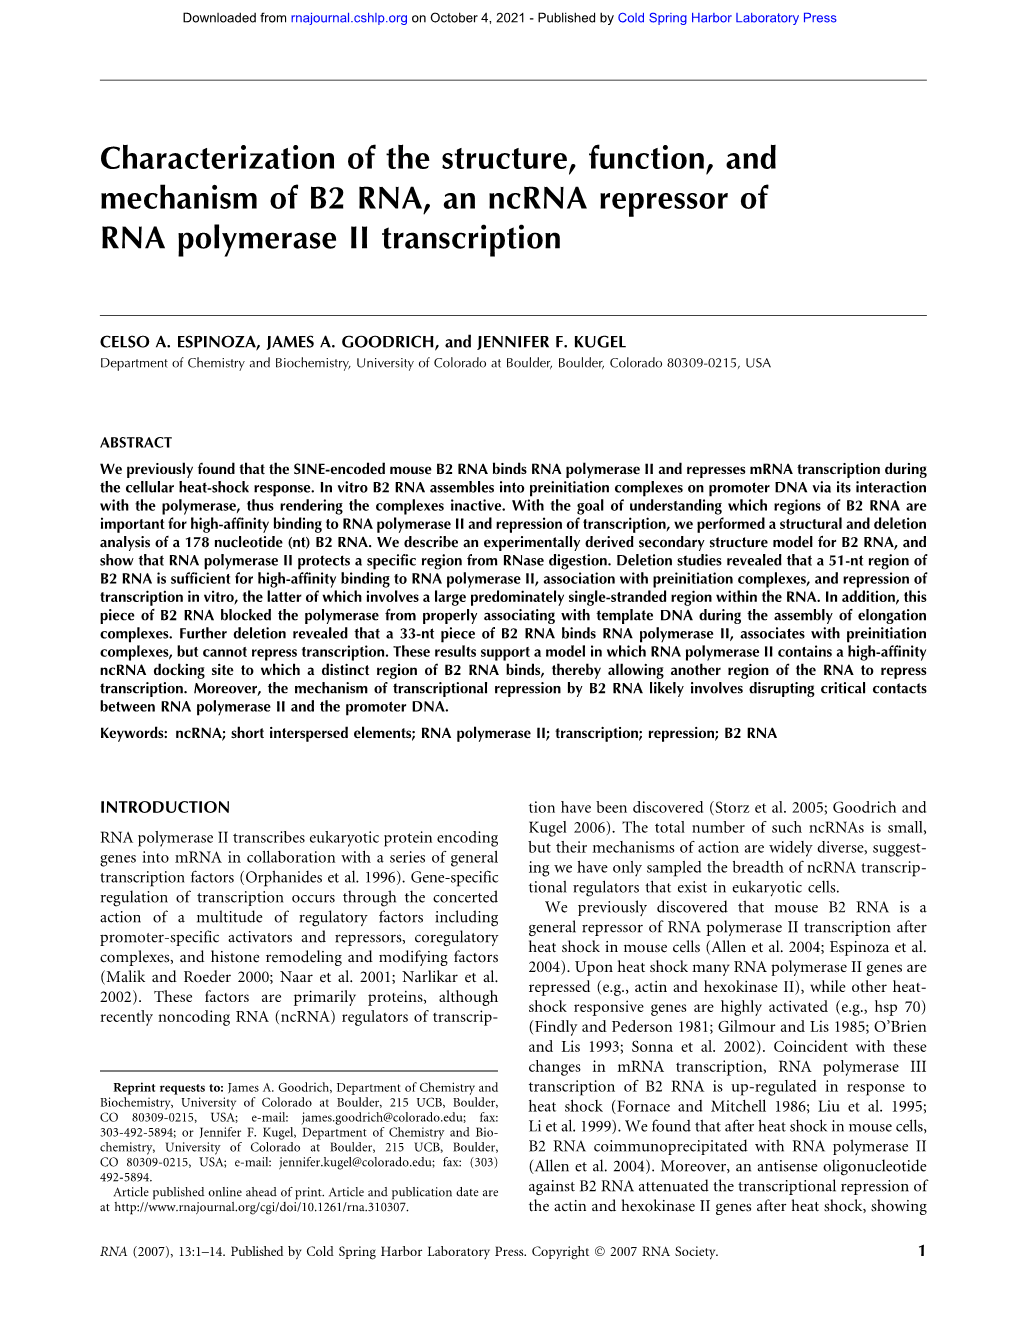 Characterization of the Structure, Function, and Mechanism of B2 RNA, an Ncrna Repressor of RNA Polymerase II Transcription